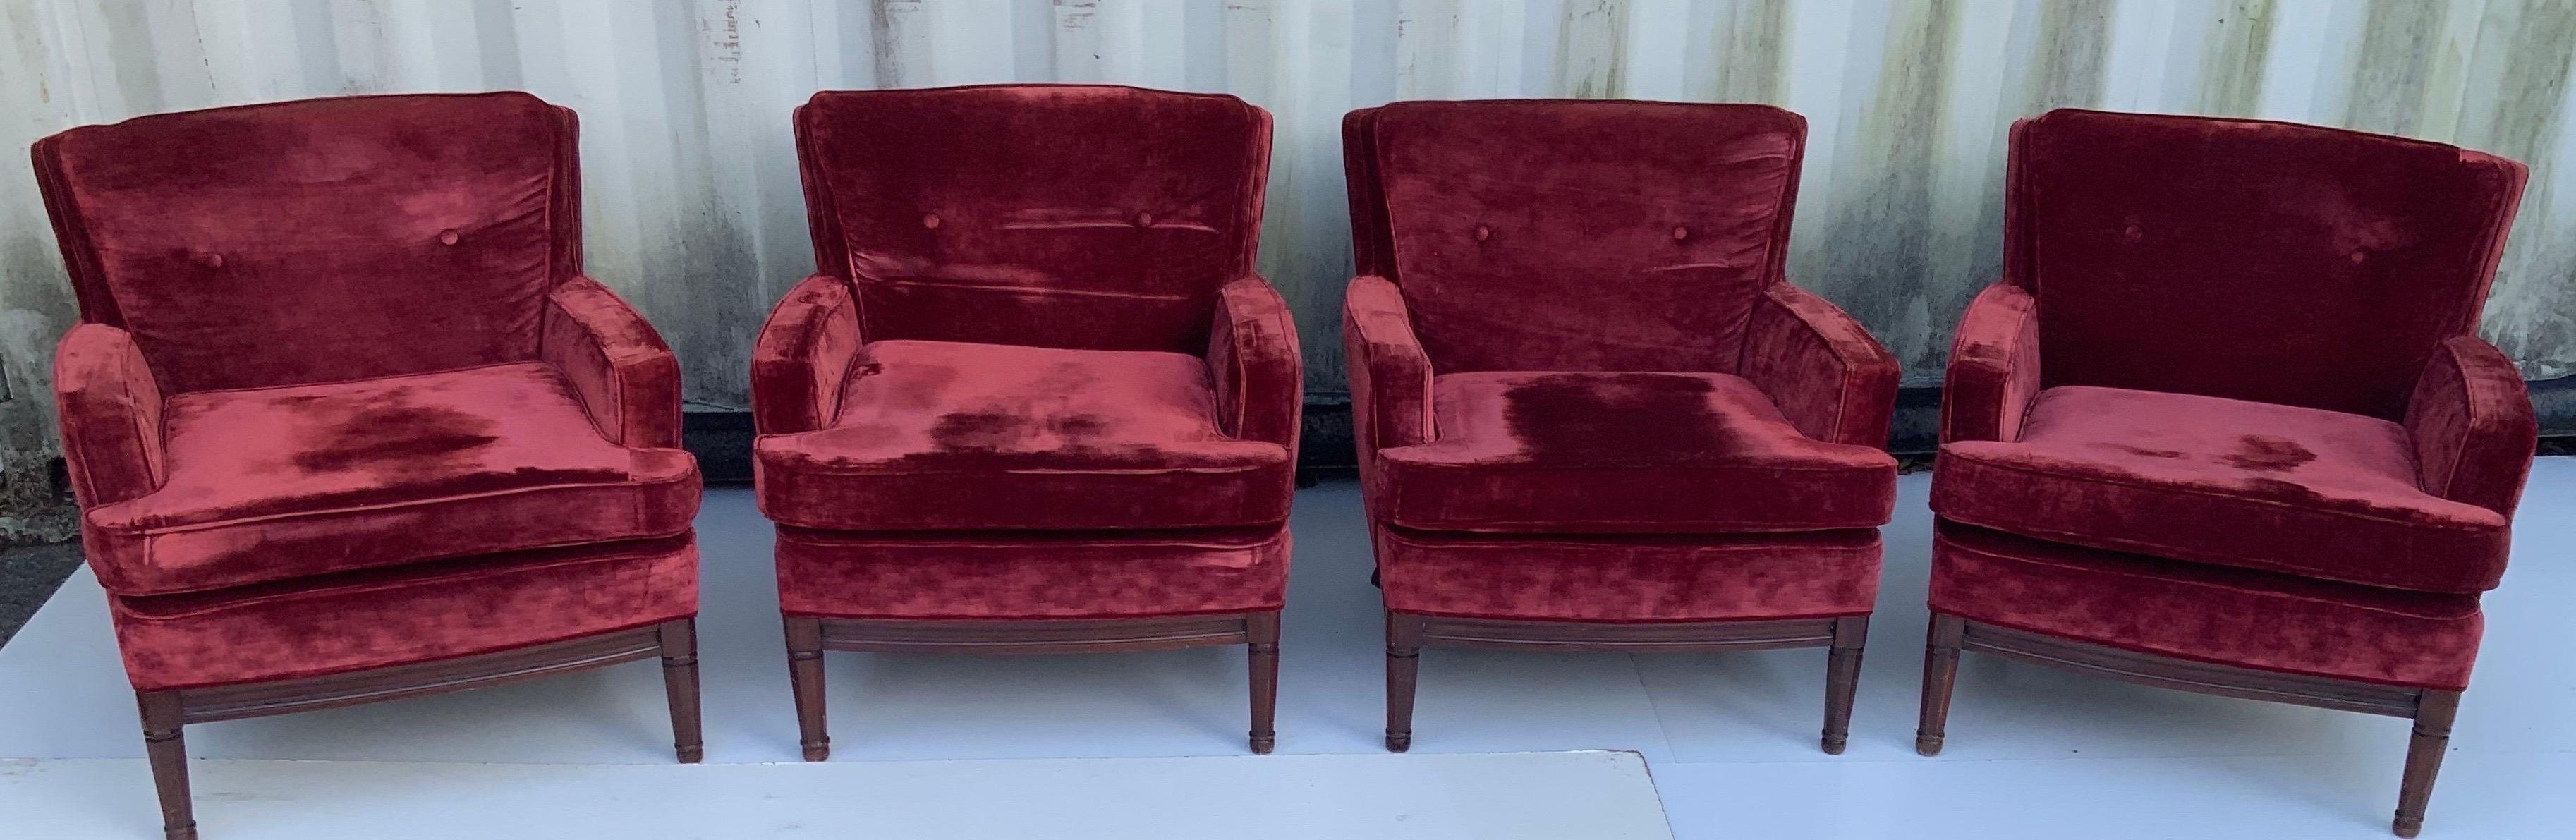 Pair of Neoclassical Maison Jansen Lounge Chairs circa 1960, 2 Pairs Available For Sale 6